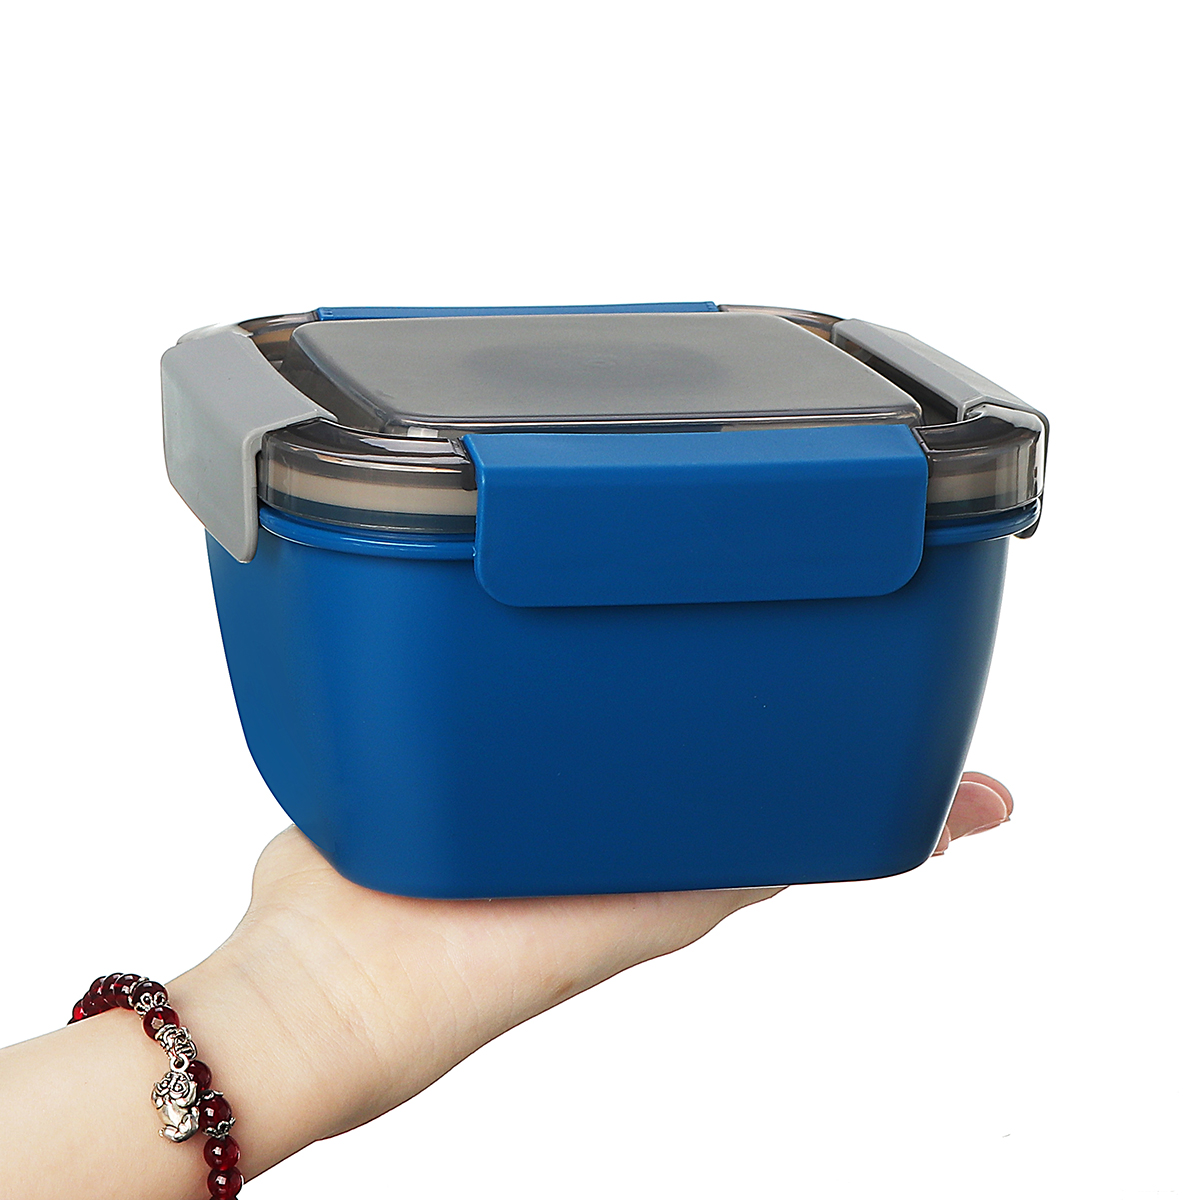 Portable-Sealed-Divider-Bento-Lunch-Box-Container-Leak-Proof-Food-Stroage-Case-Camping-BBQ-Tableware-1565575-7